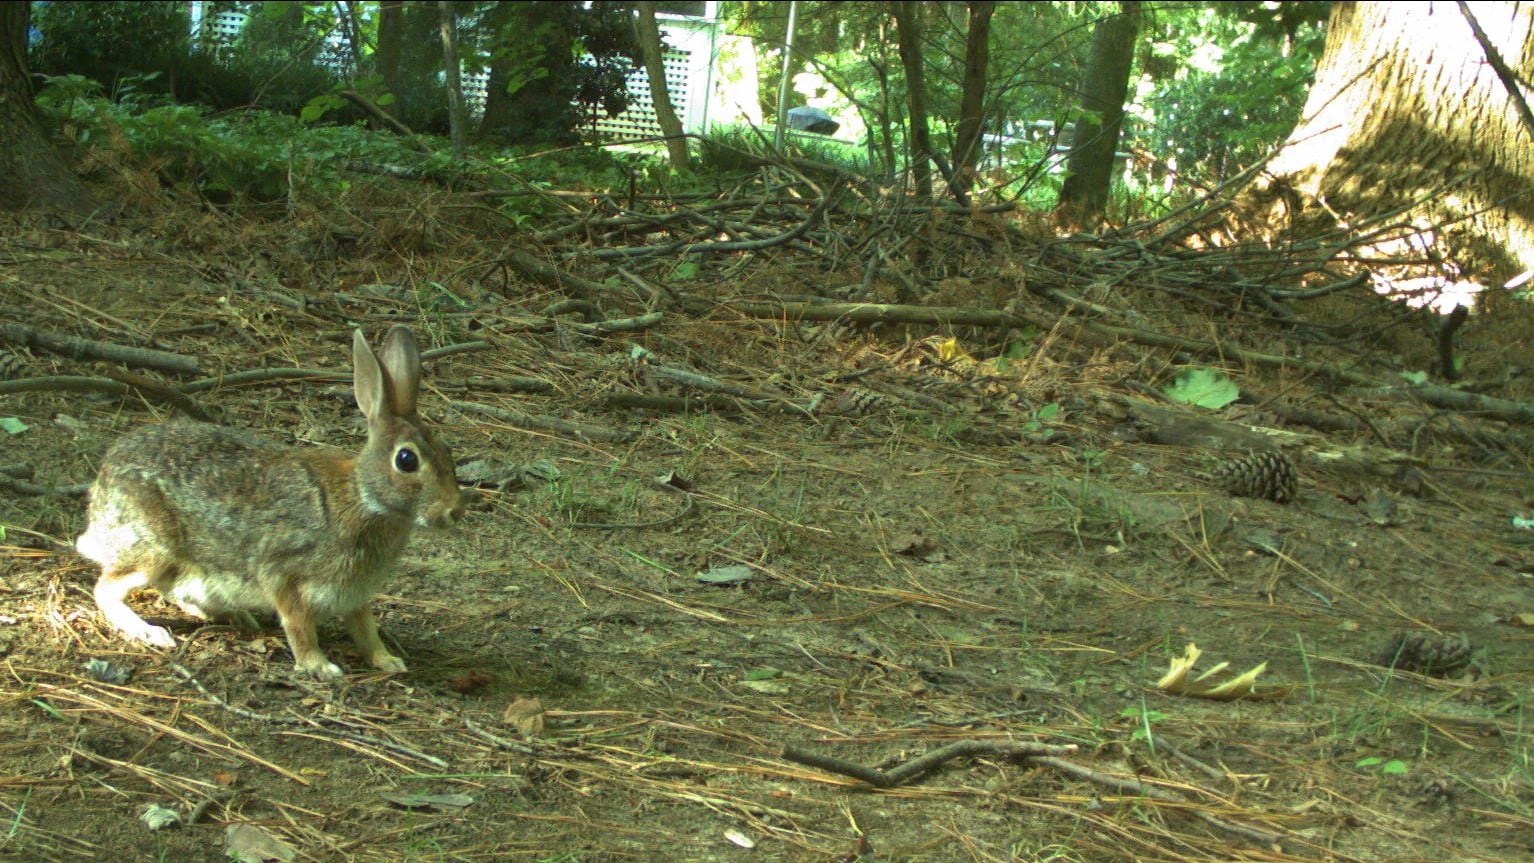 Eastern cottontail - During 'Anthropause,' Animals Moved More Freely - College of Natural Resources News NC State University